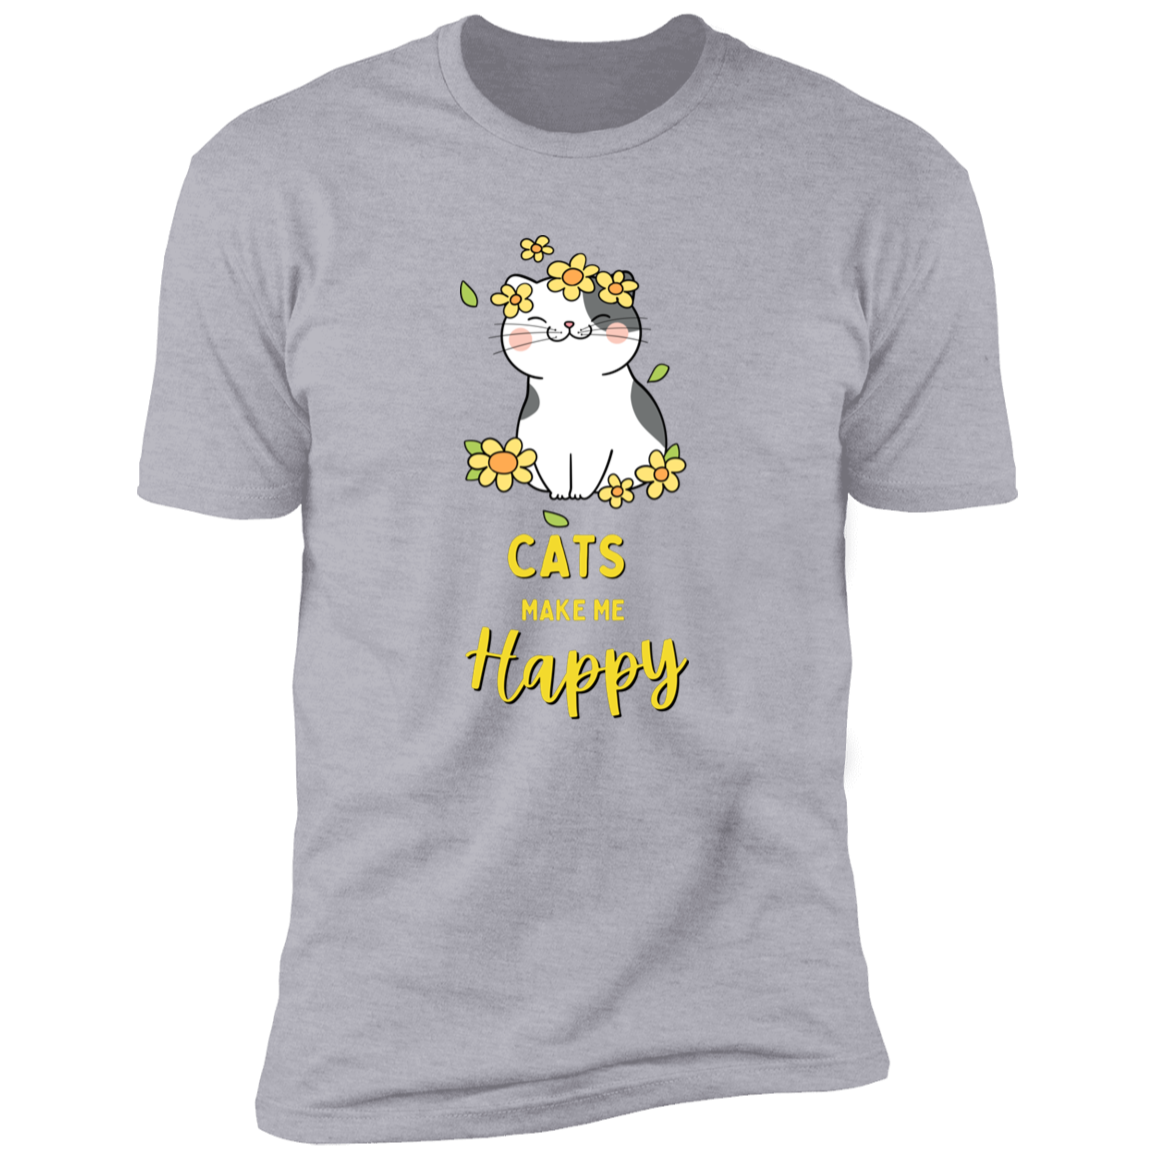 Cats Make Me Happy T-shirt, Cat Shirt for humans, in light heather gray